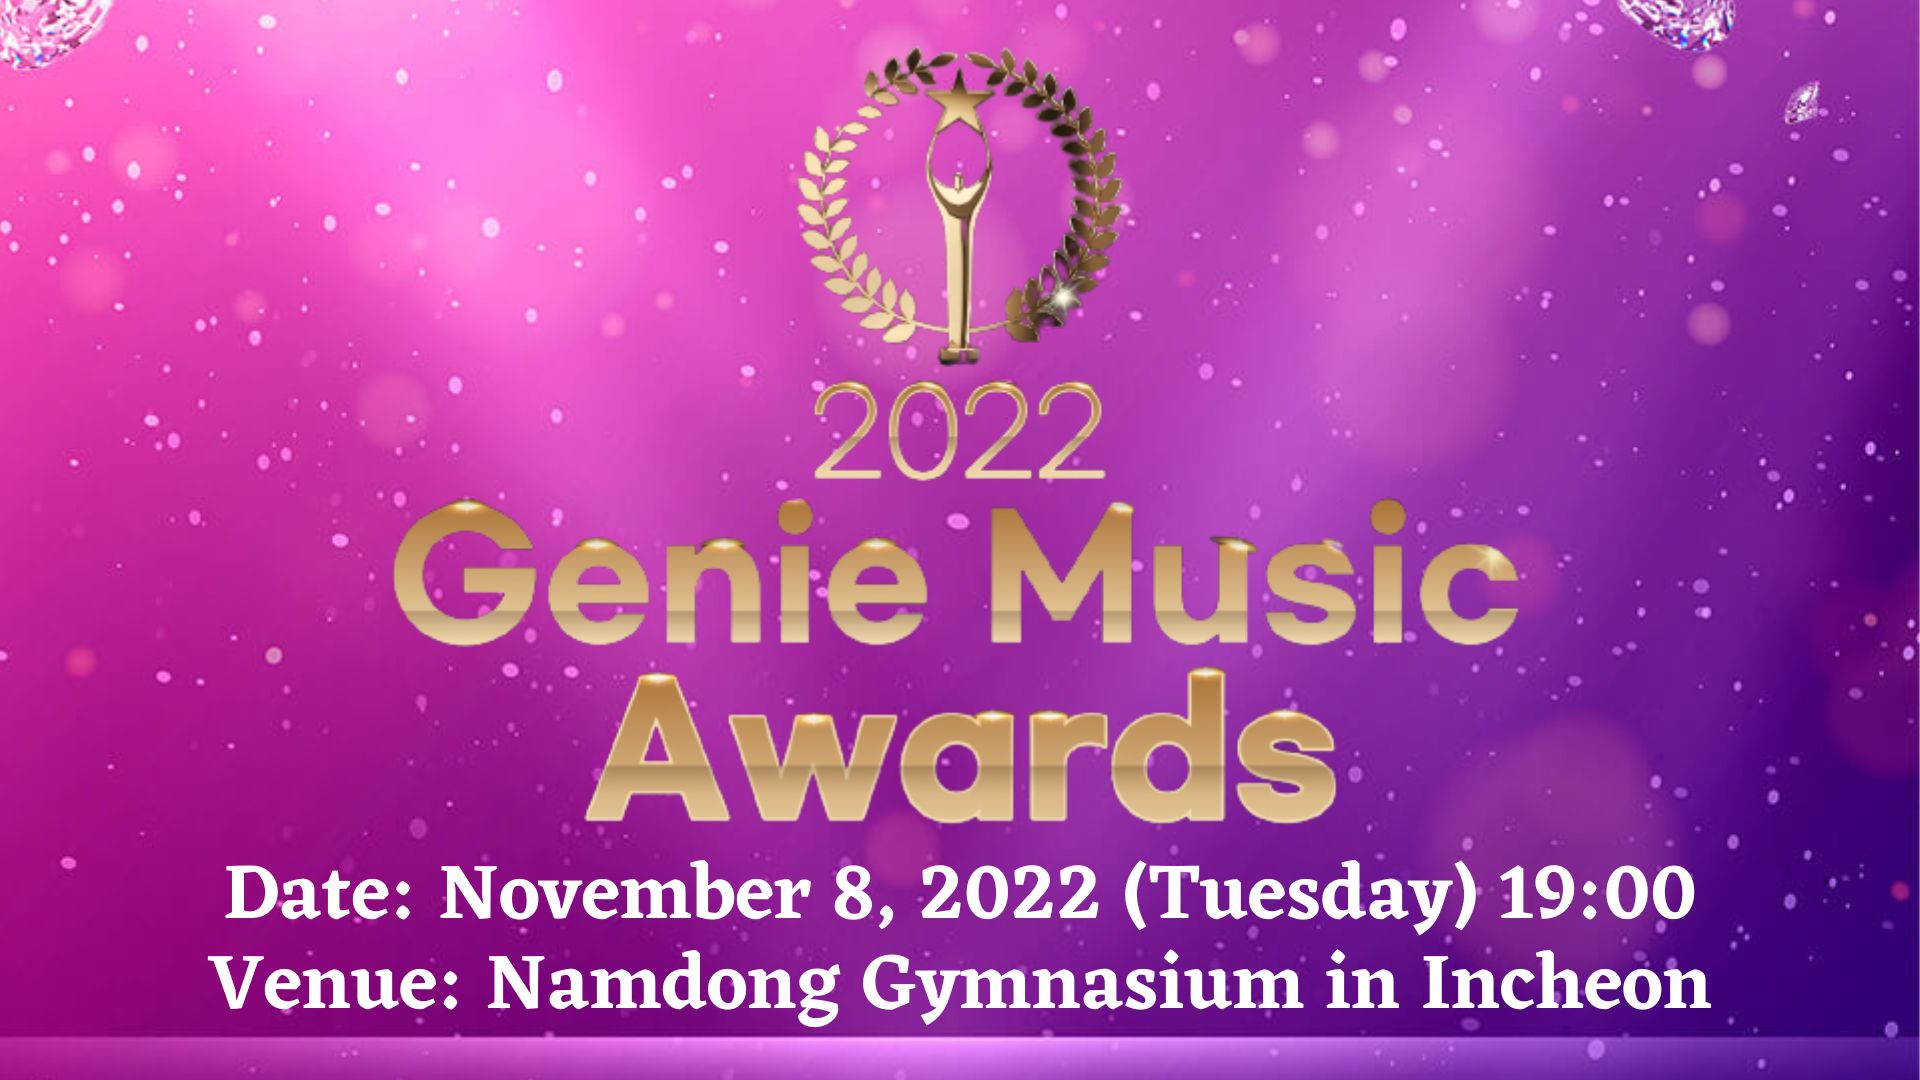 Genie Music Awards 2022 Start time, Artist lineup, Nominees, How to watch